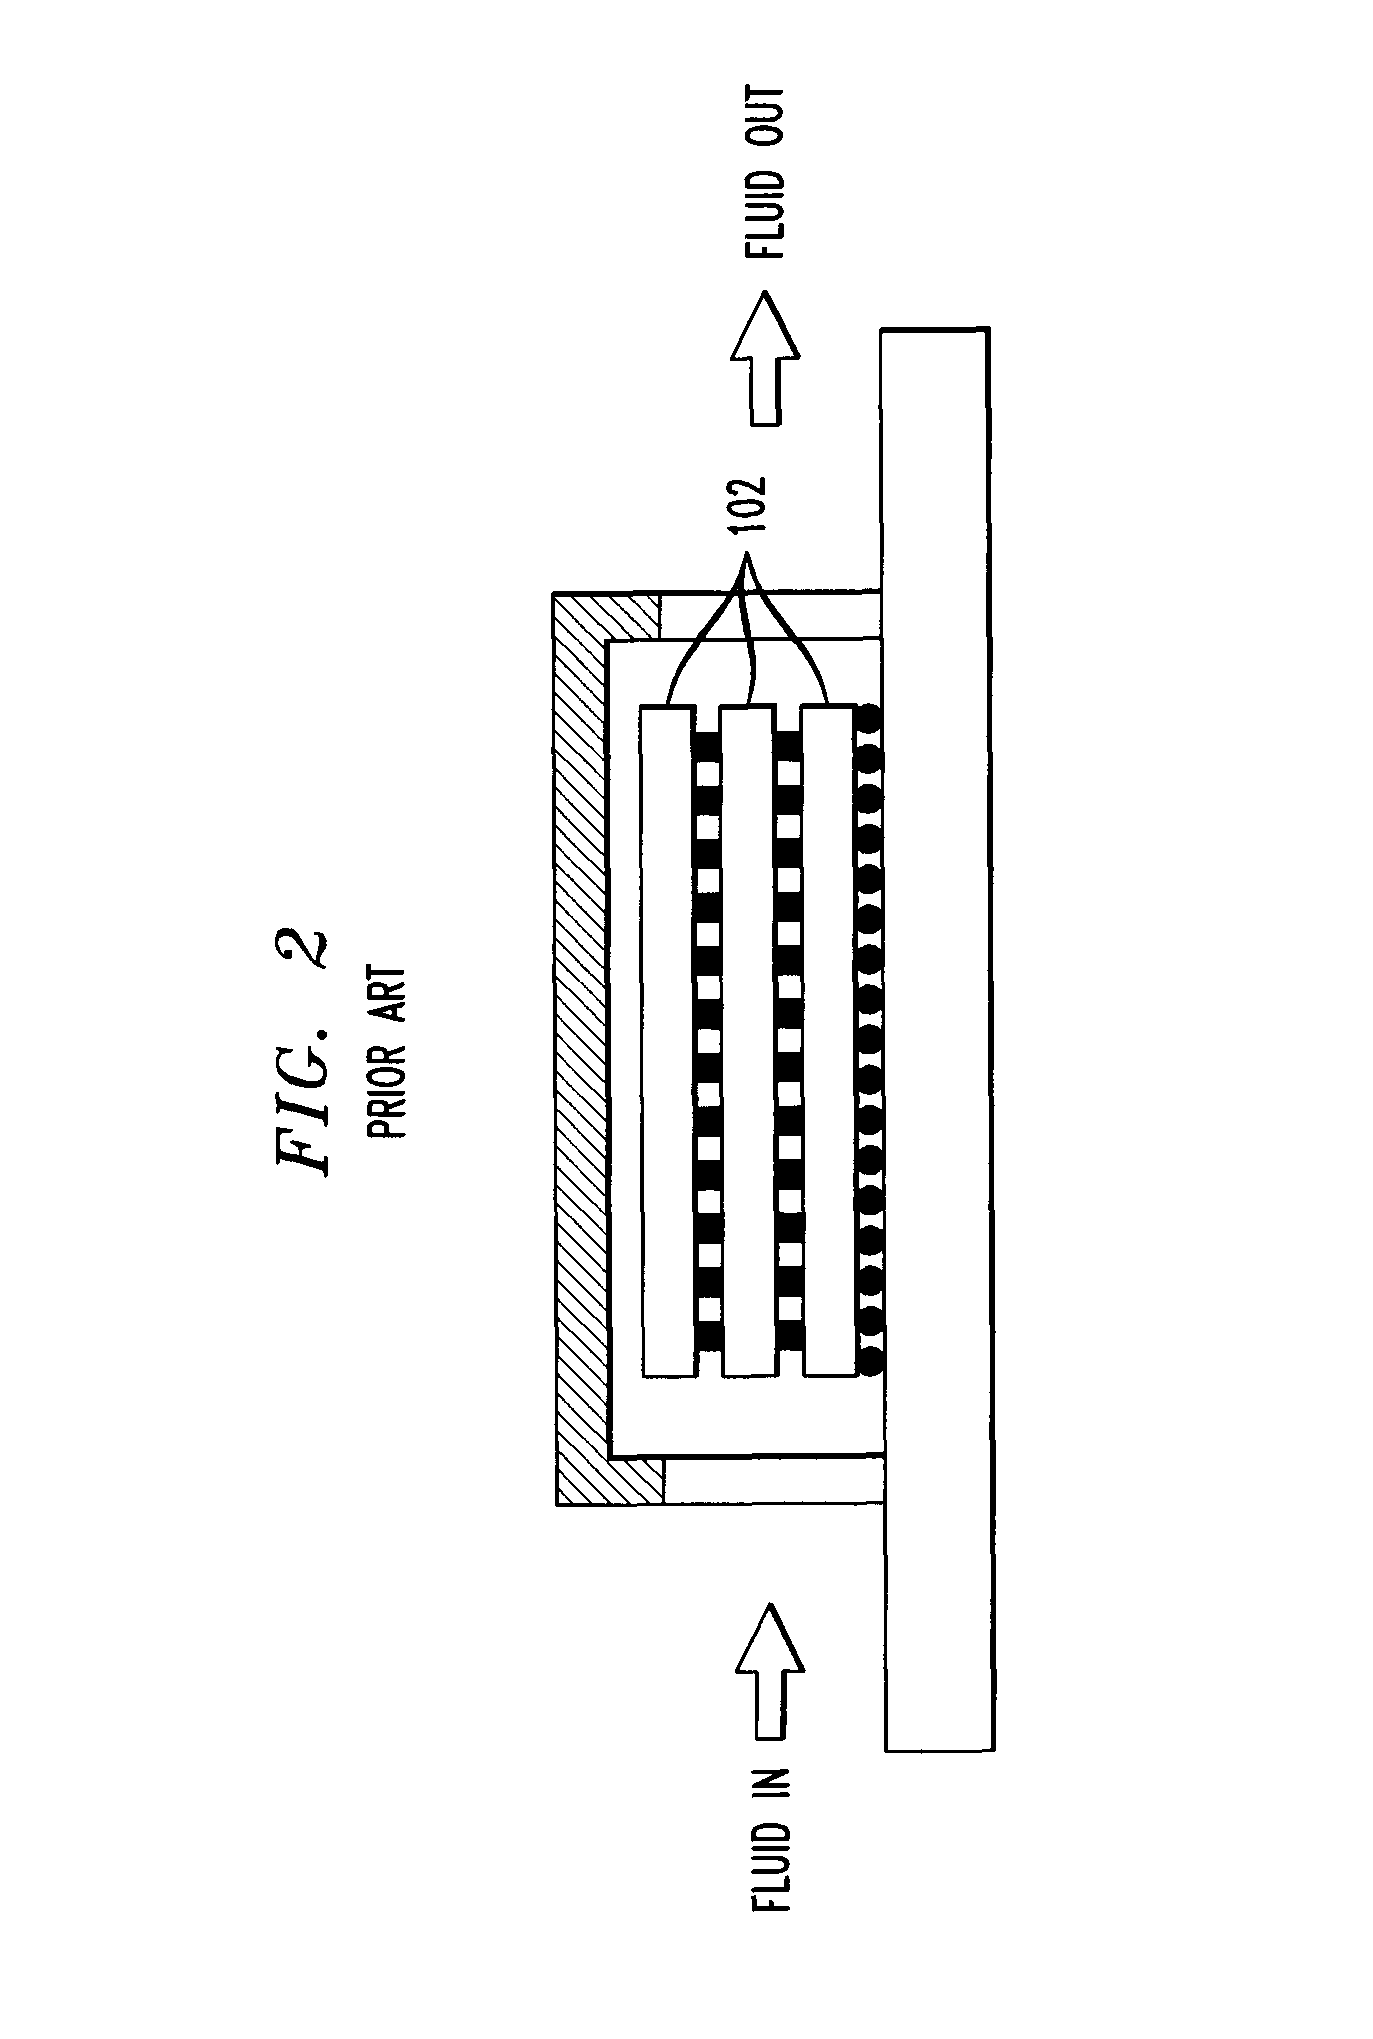 Double-face heat removal of vertically integrated chip-stacks utilizing combined symmetric silicon carrier fluid cavity and micro-channel cold plate